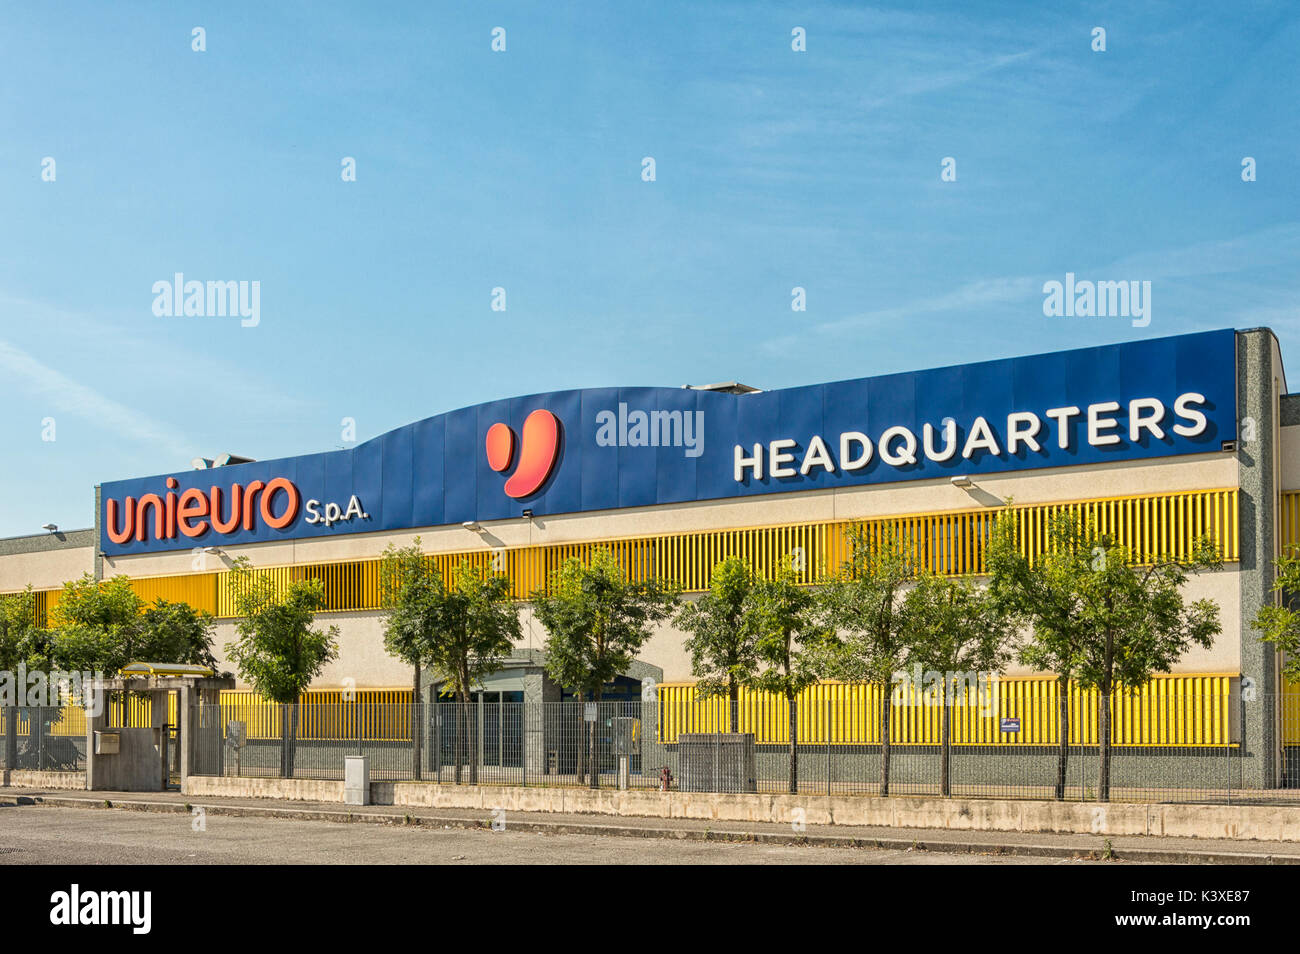 Forli, Italy - JULY 10, 2017: Unieuro Headquaters store in Forli. Unieuro  is the largest Italian omni-channel distributor of consumer electronics  Stock Photo - Alamy